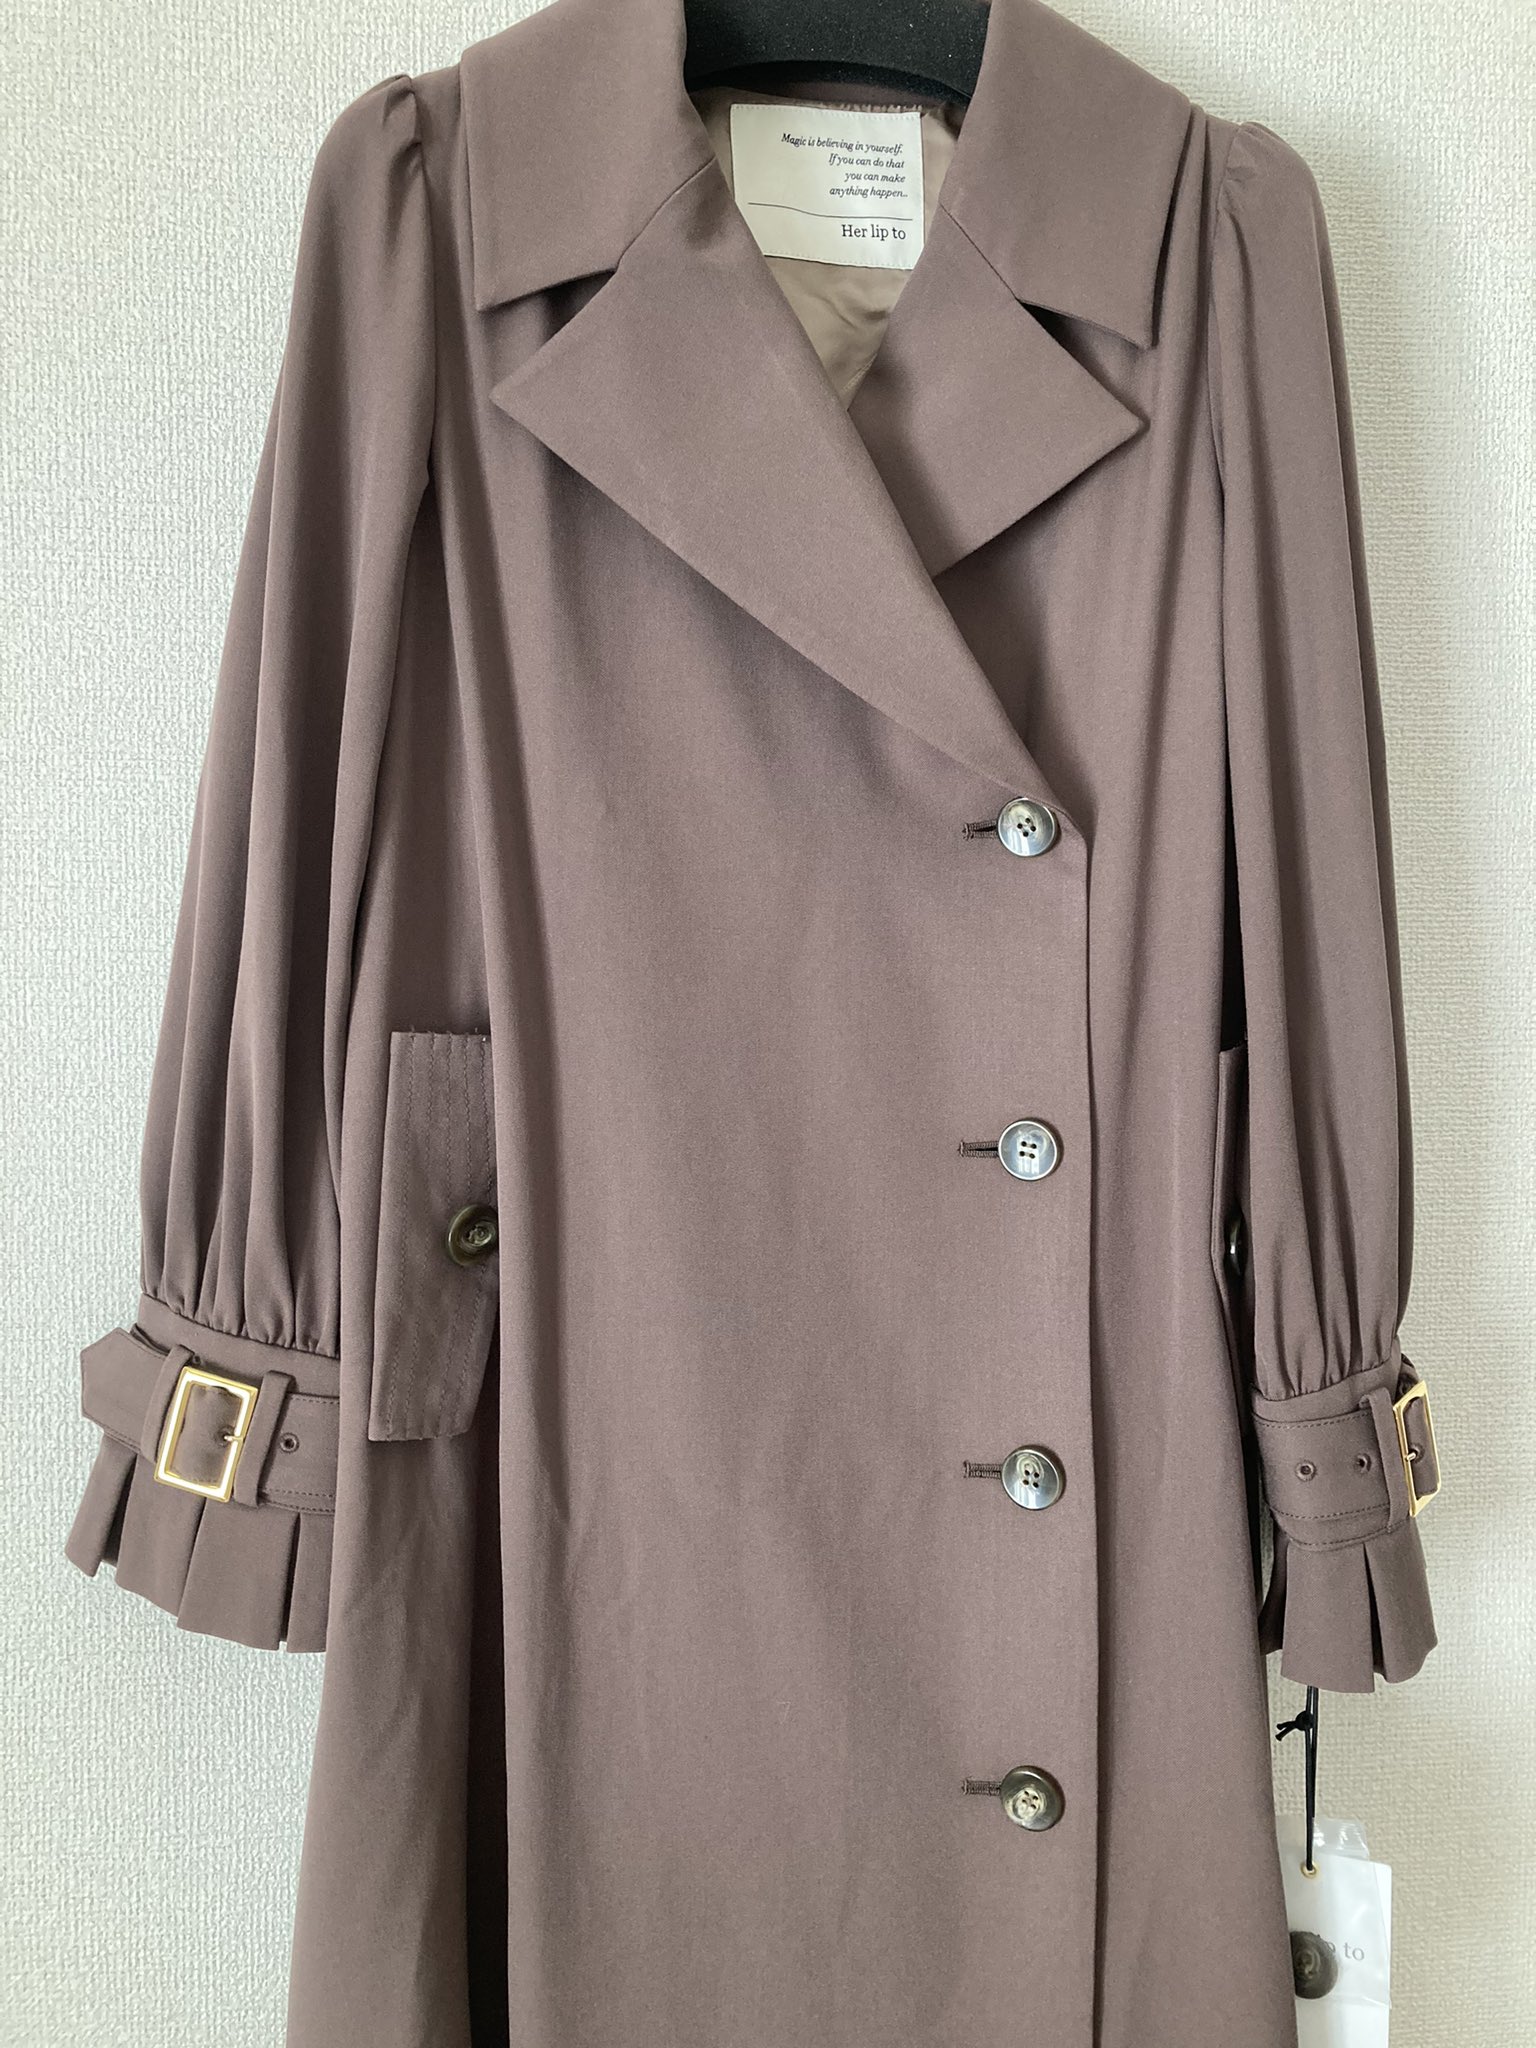 Her lip to Belted Dress Trench Coat 数量限定価格!! www.clarity.pe